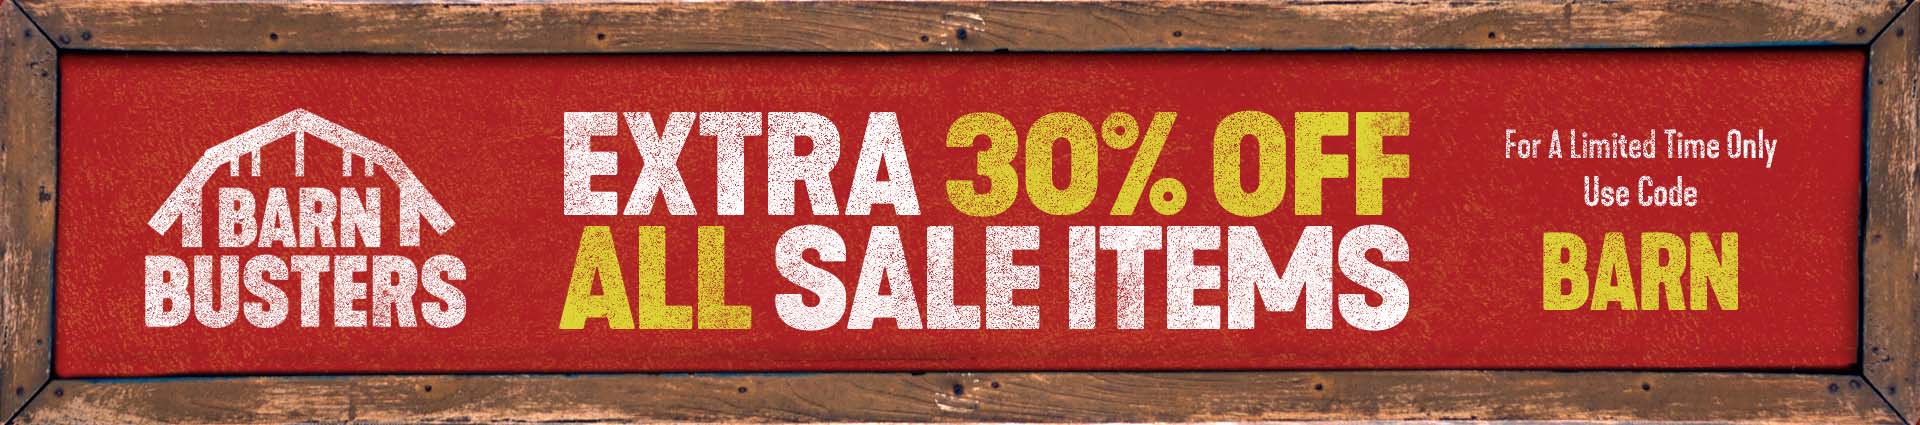 Barn Busters: Extra 30% off on all sale items. For a limited time, use code: BARN.